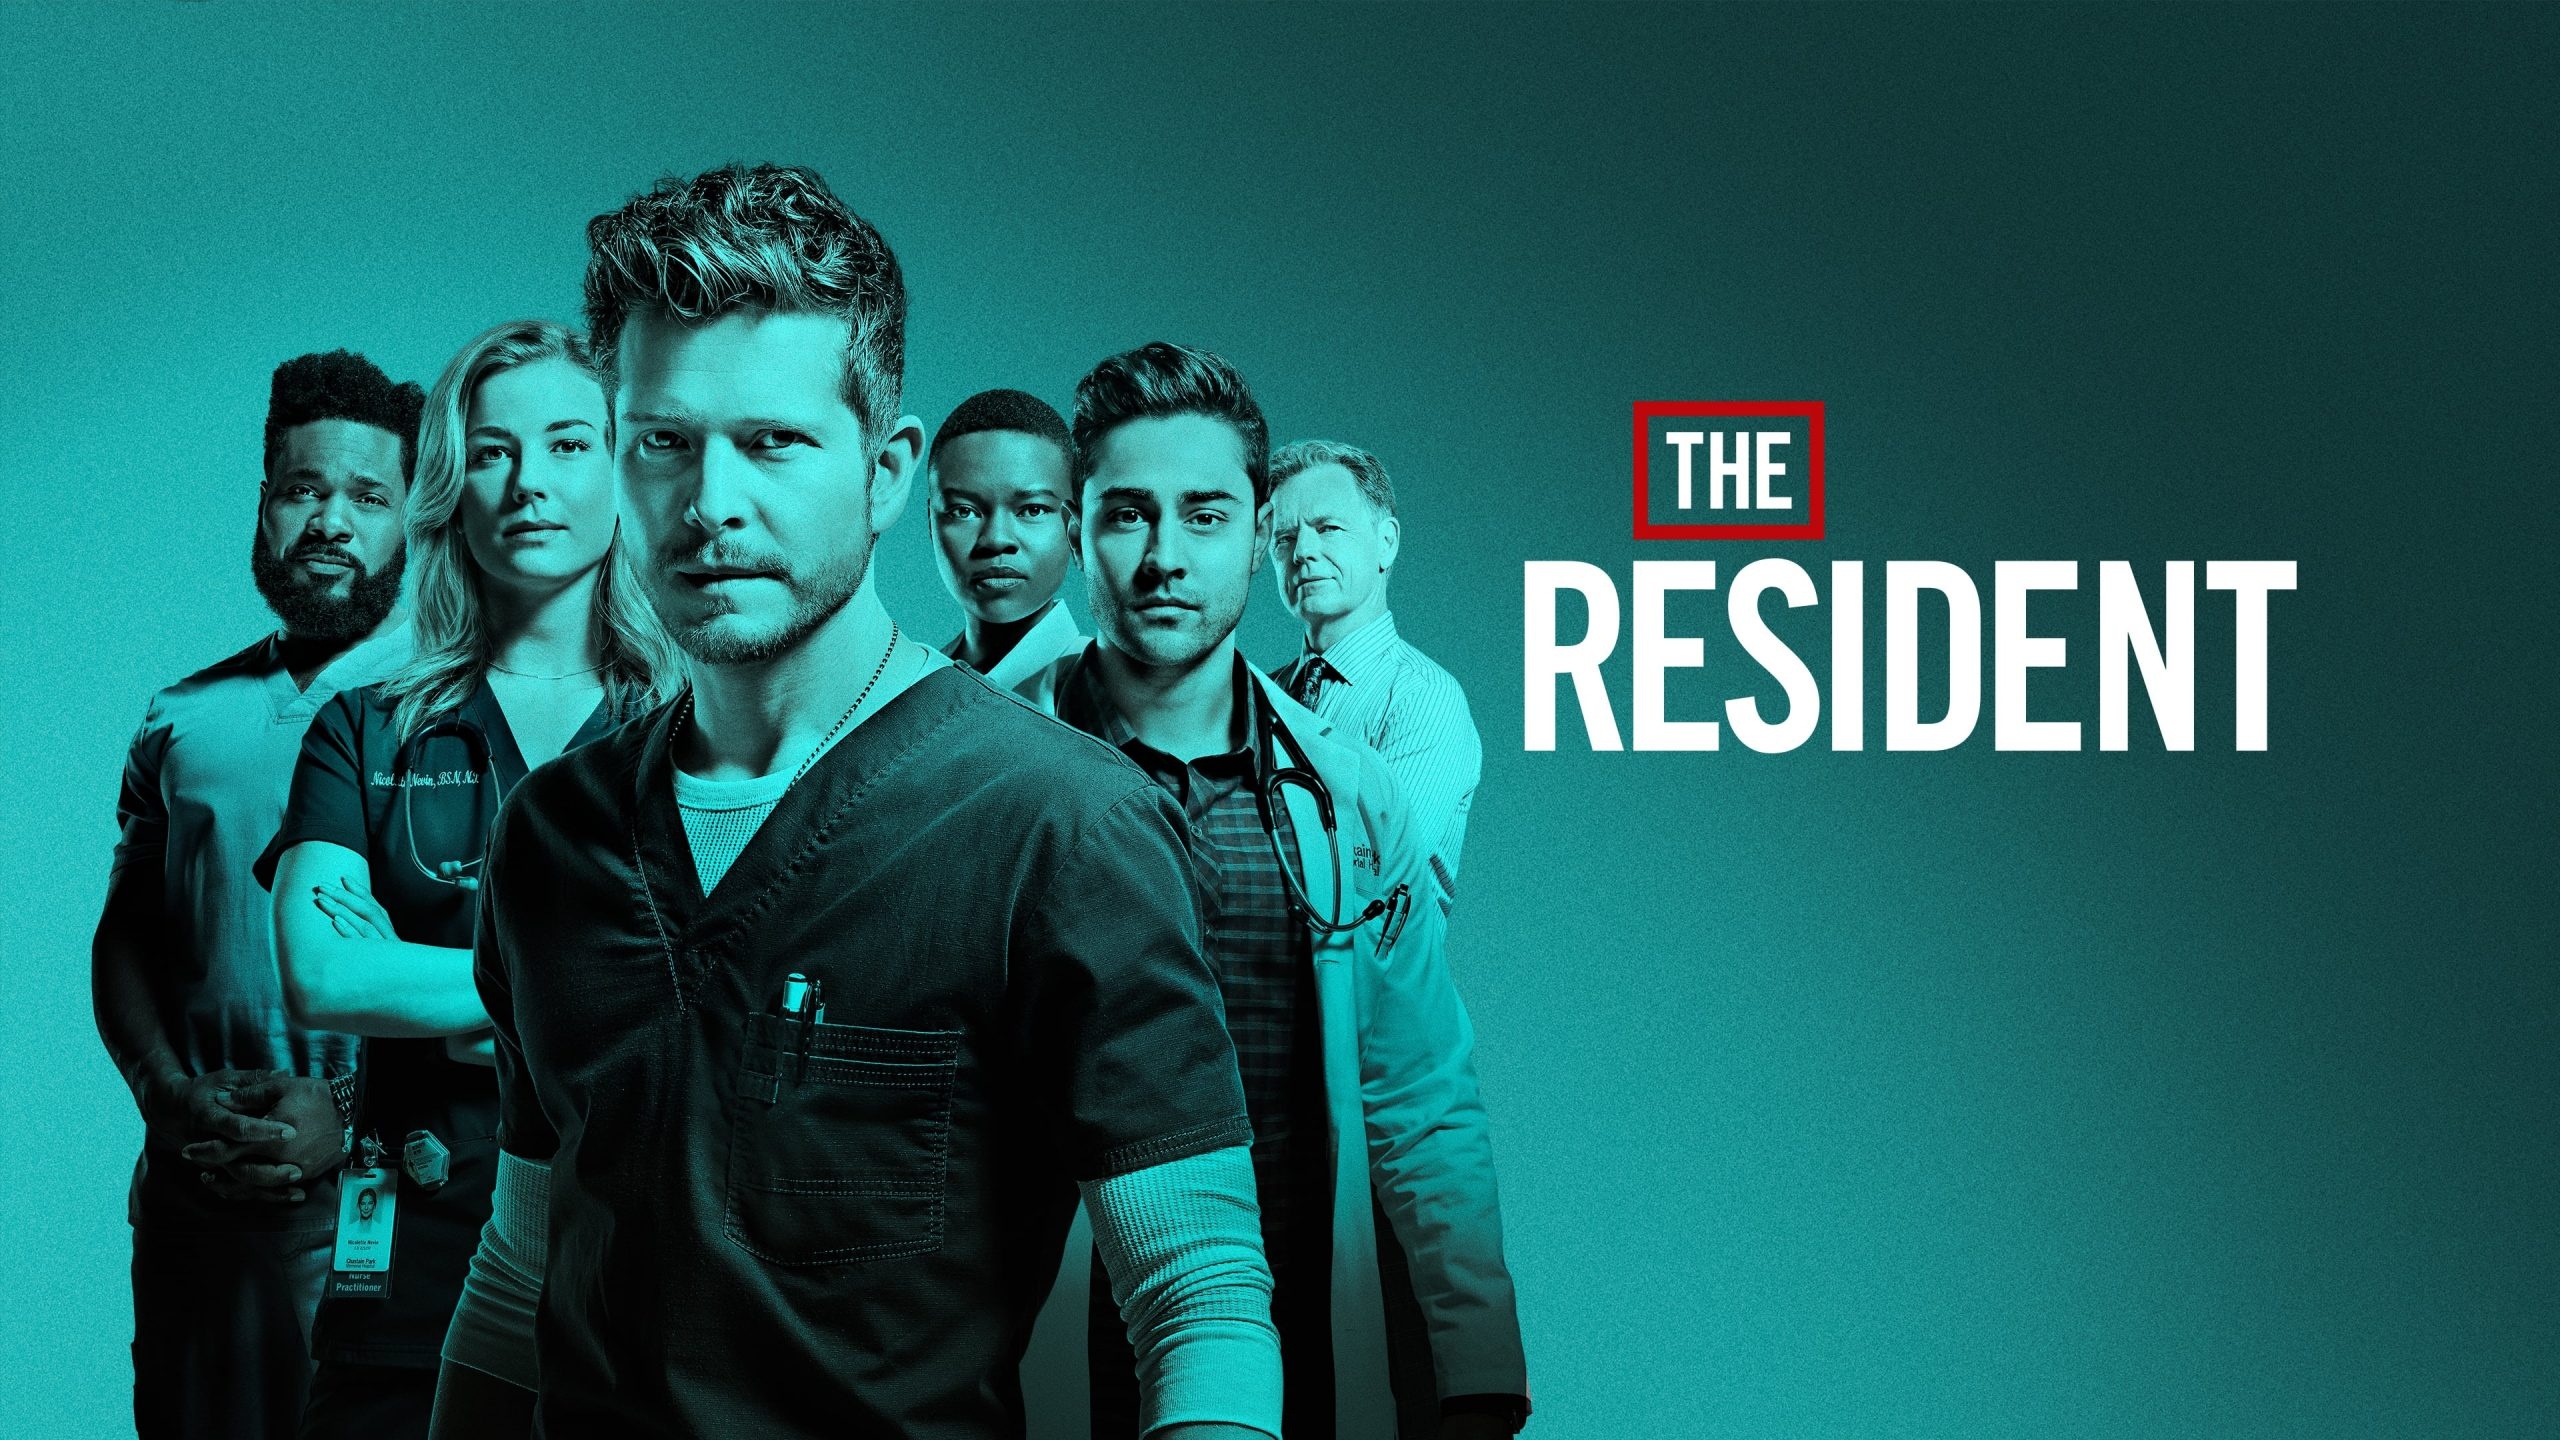 The Resident TV Series, Season 5 online streaming, Worldwide availability, Viewing options, 2560x1440 HD Desktop